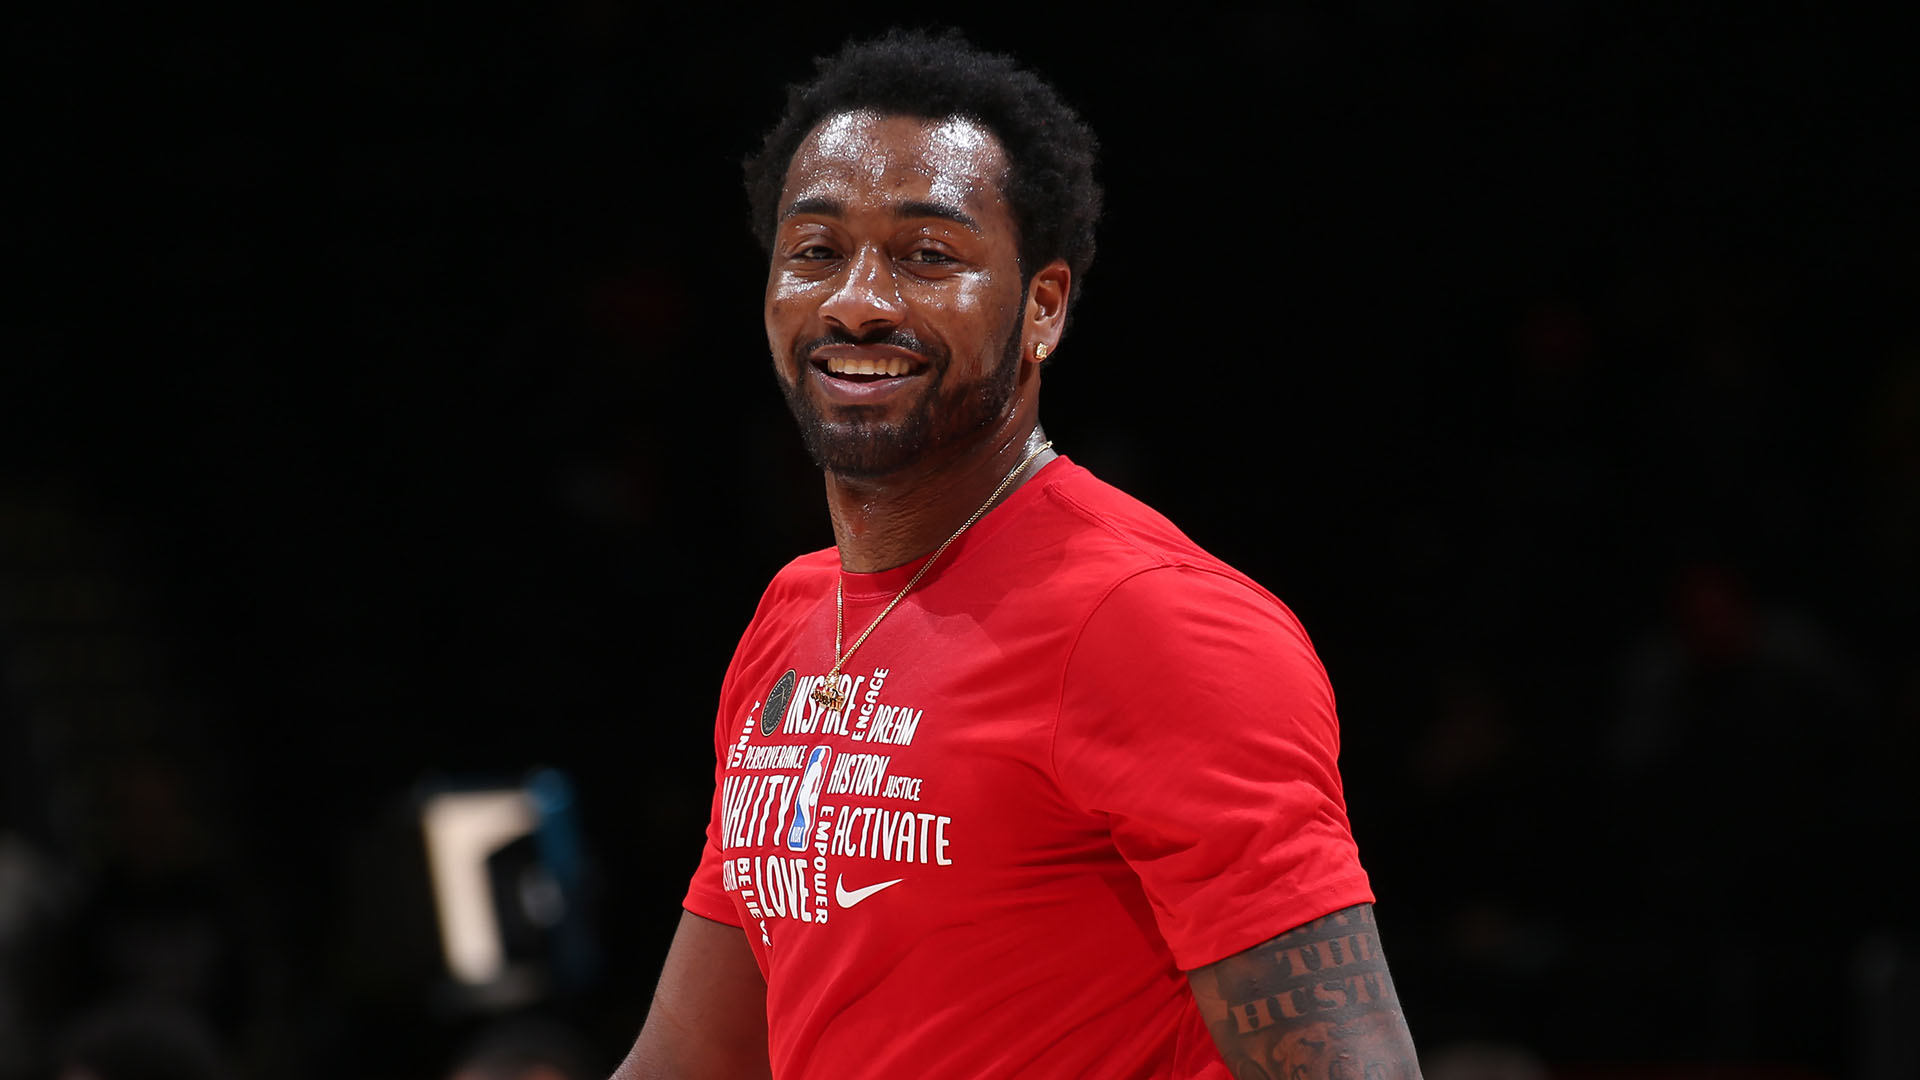 Reports: John Wall agrees to contract buyout with Rockets